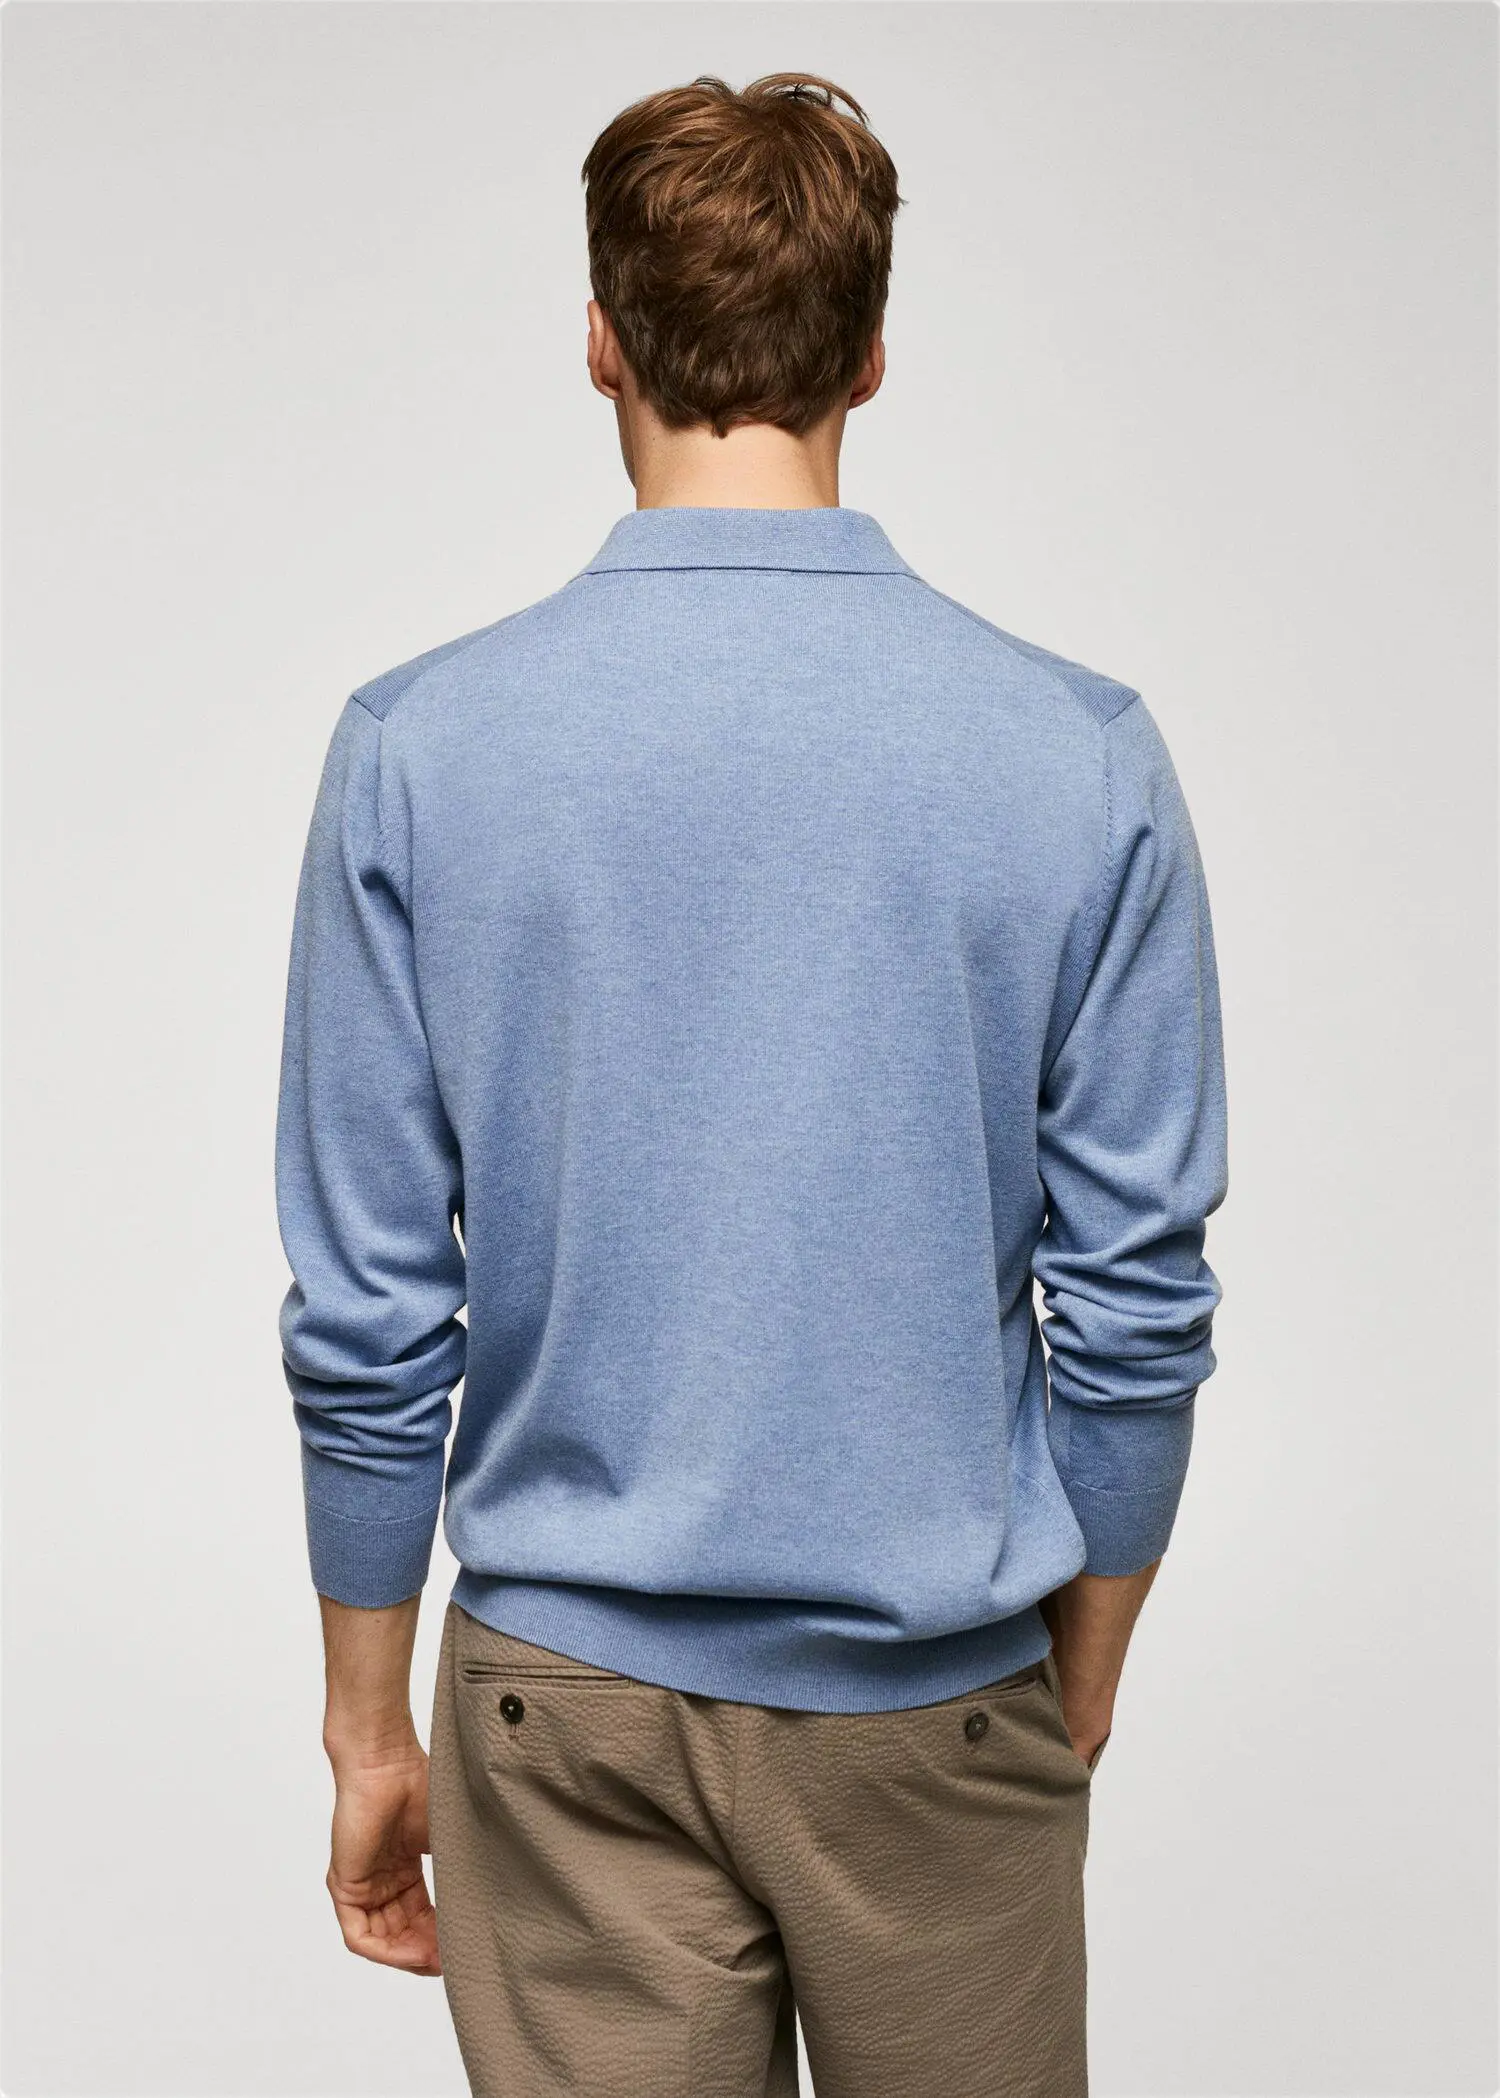 Mango Long-sleeved cotton jersey polo shirt. a man wearing a light blue sweater standing in front of a wall. 